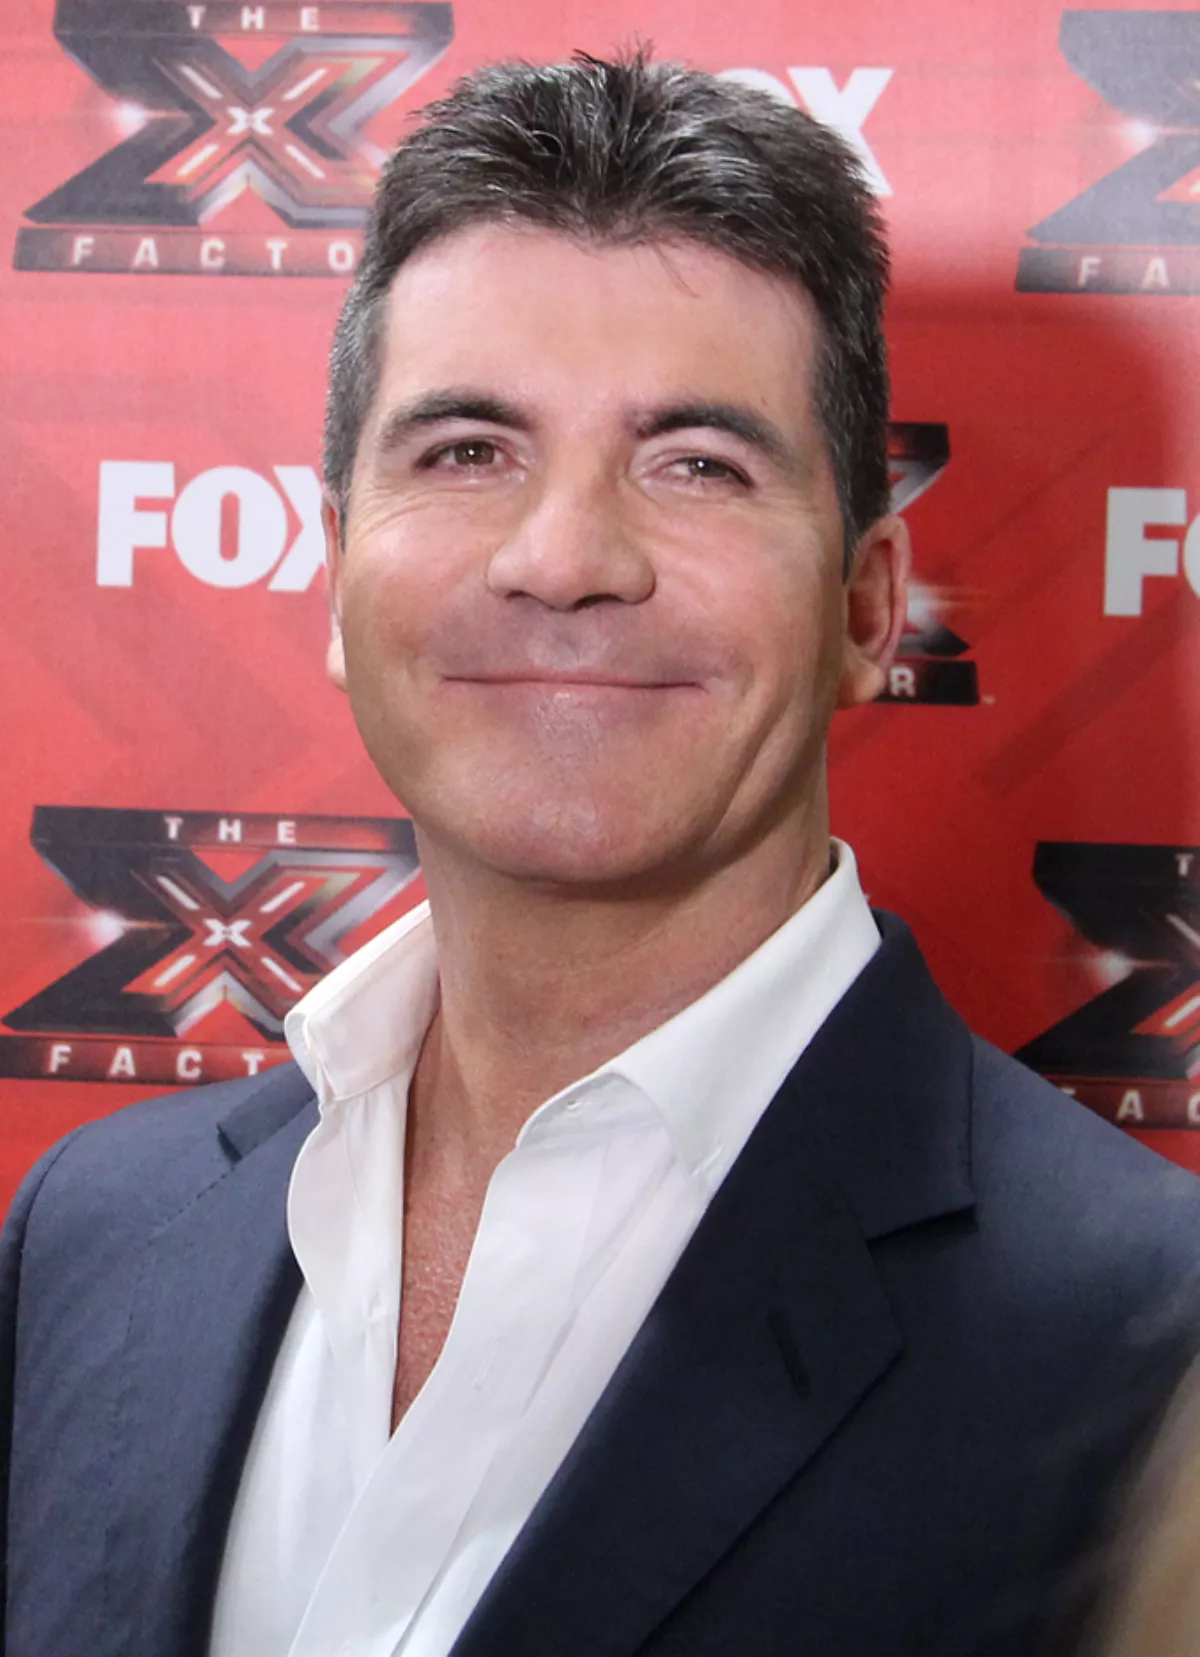 facts about simon cowell.html